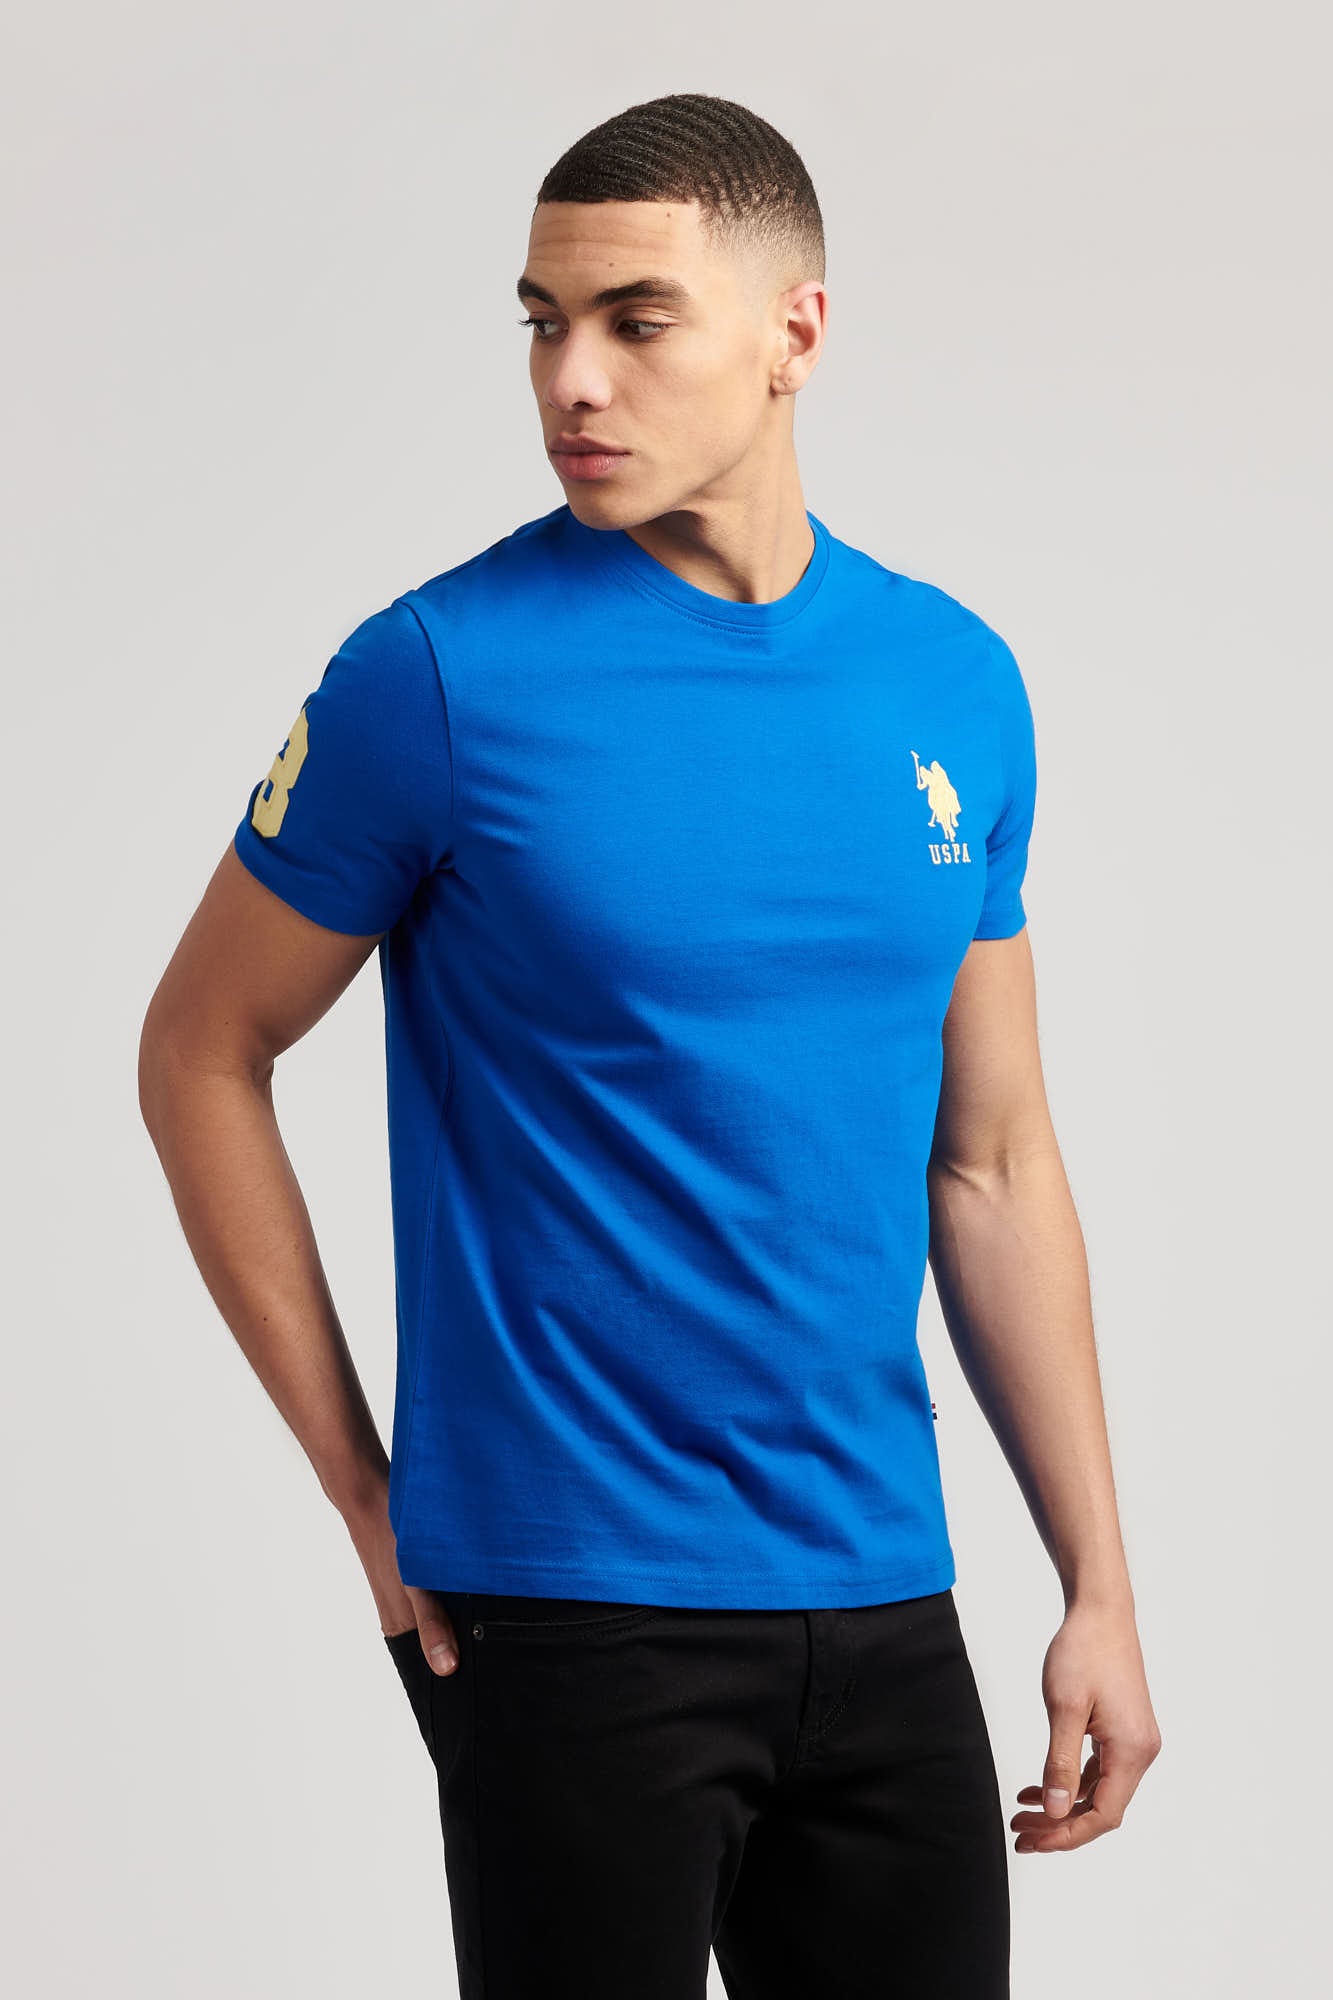 Mens Player 3 T-Shirt in Nautical Blue